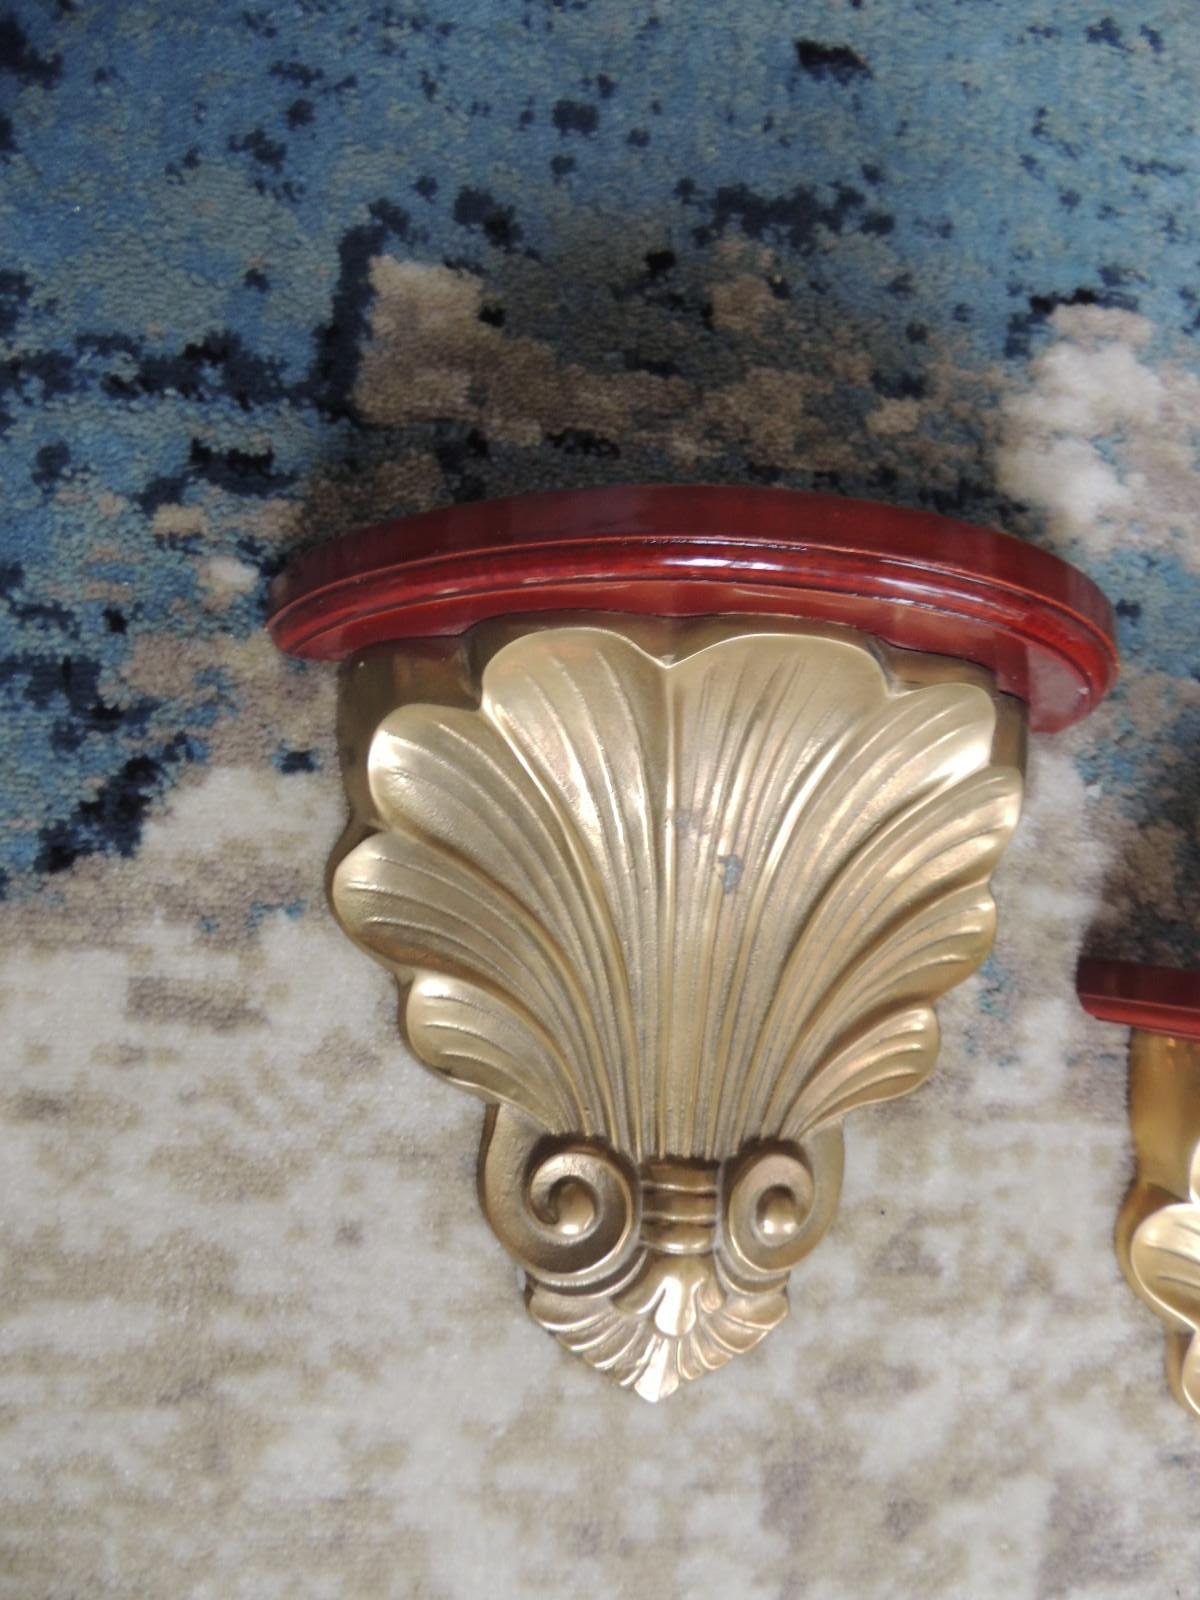 Pair of brass and lacquered wood plate display shelves.
Acanthus brass shelves with reddish mahogany color wood tops.
Could hold plates or regular statue or figurine.
Size: 9.5